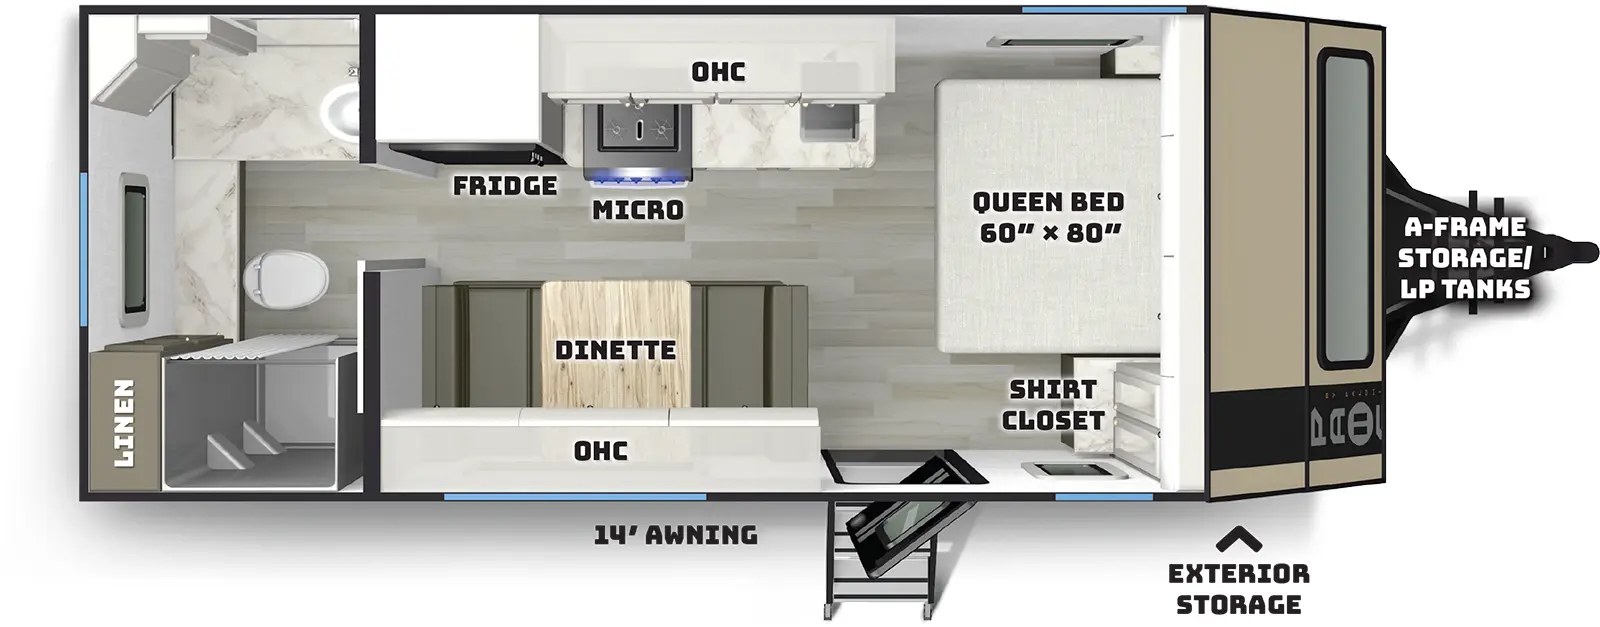 The 19.4 has zero slideouts and one entry. Exterior features a-frame storage, LP tanks, exterior storage, and 14 foot awning. Interior layout front to back: foot-facing queen bed with door side shirt closet; off-door side kitchen counter with sink cooktop, overhead cabinet, microwave, and refrigerator; door side entry, dinette and overhead cabinet; rear full bathroom with linen closet.